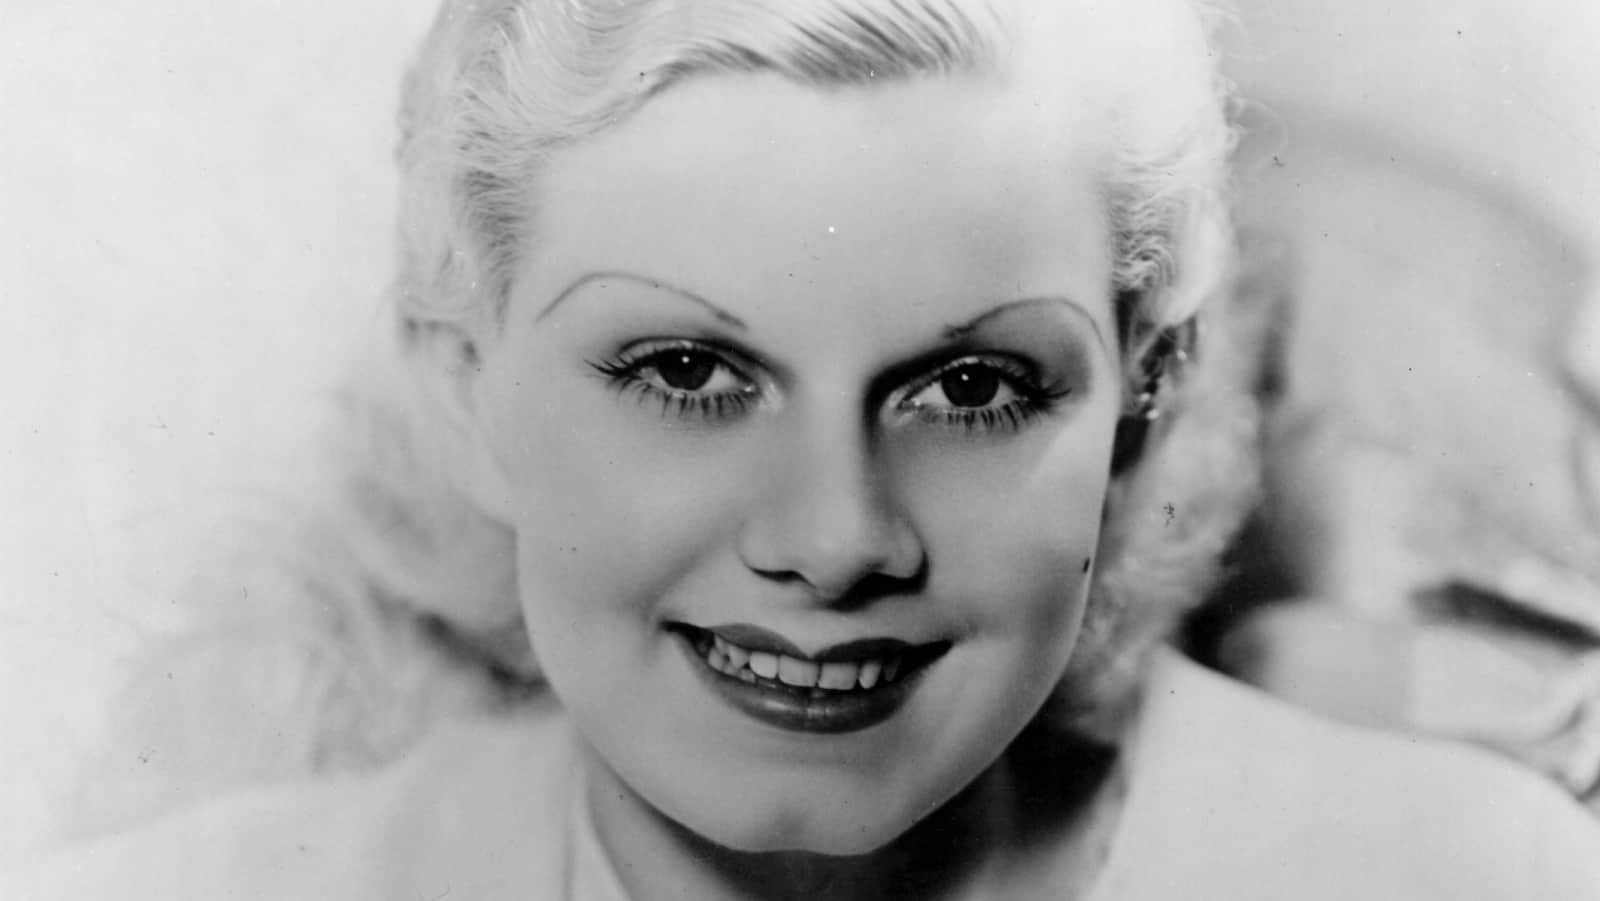 happened to Jean Harlow